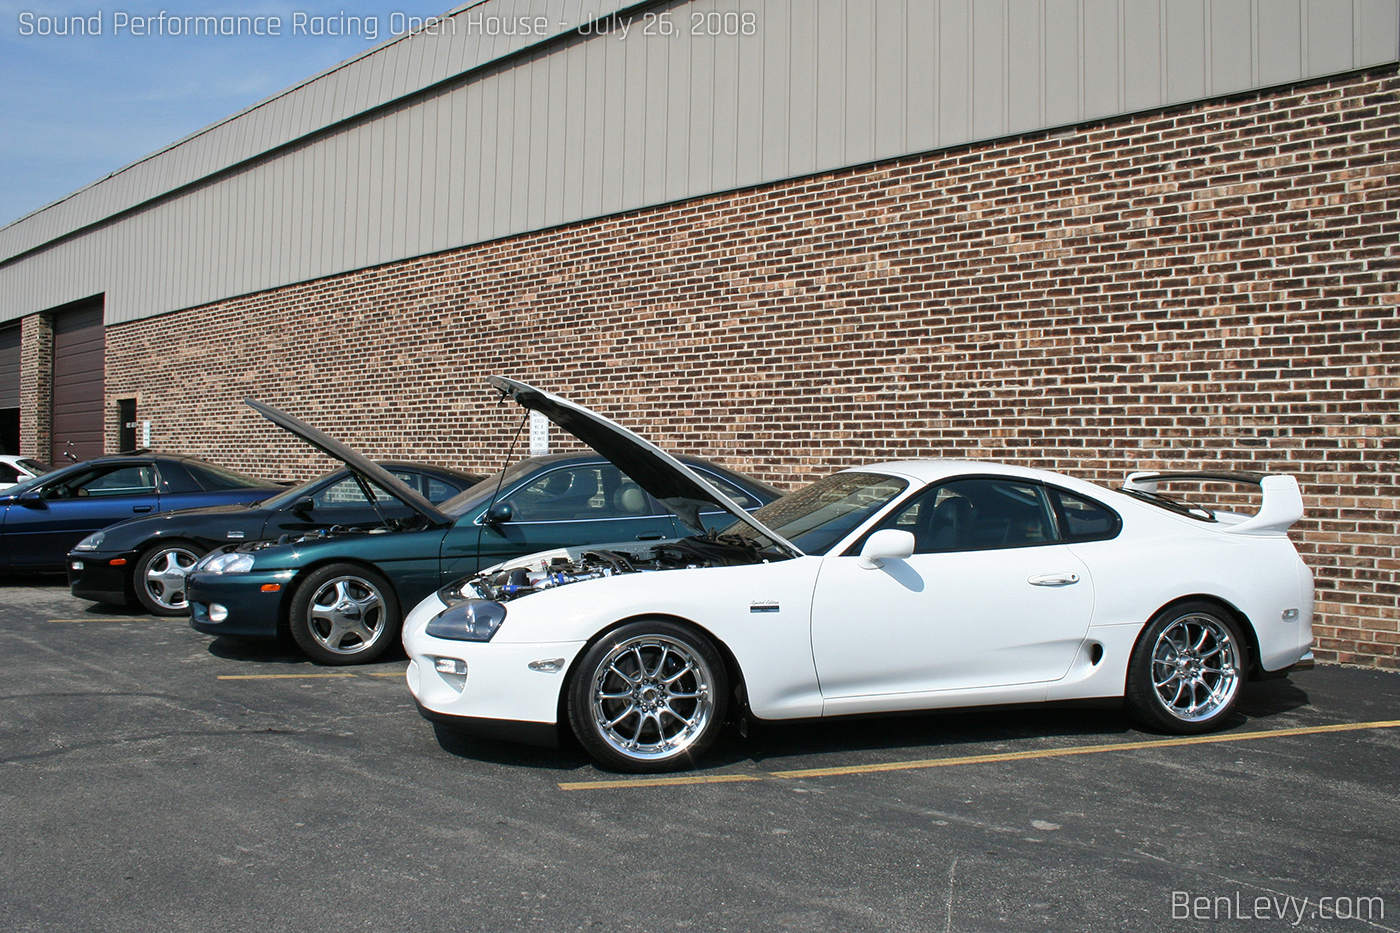 Supras and SC300 at the Sound Performance Racing Open House